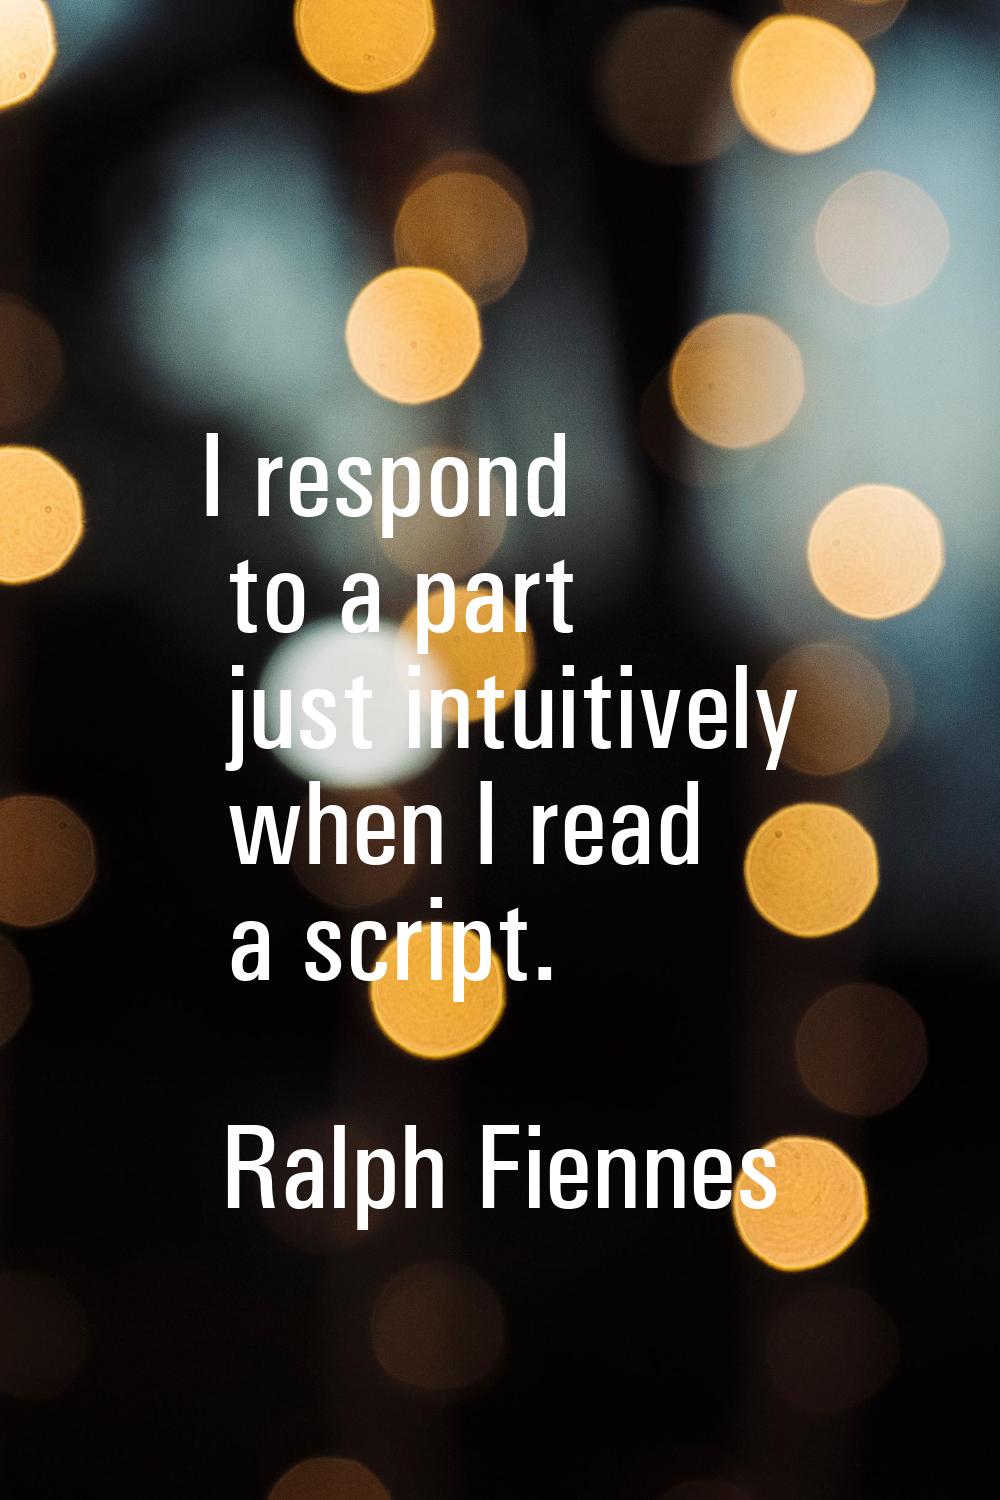 I respond to a part just intuitively when I read a script.